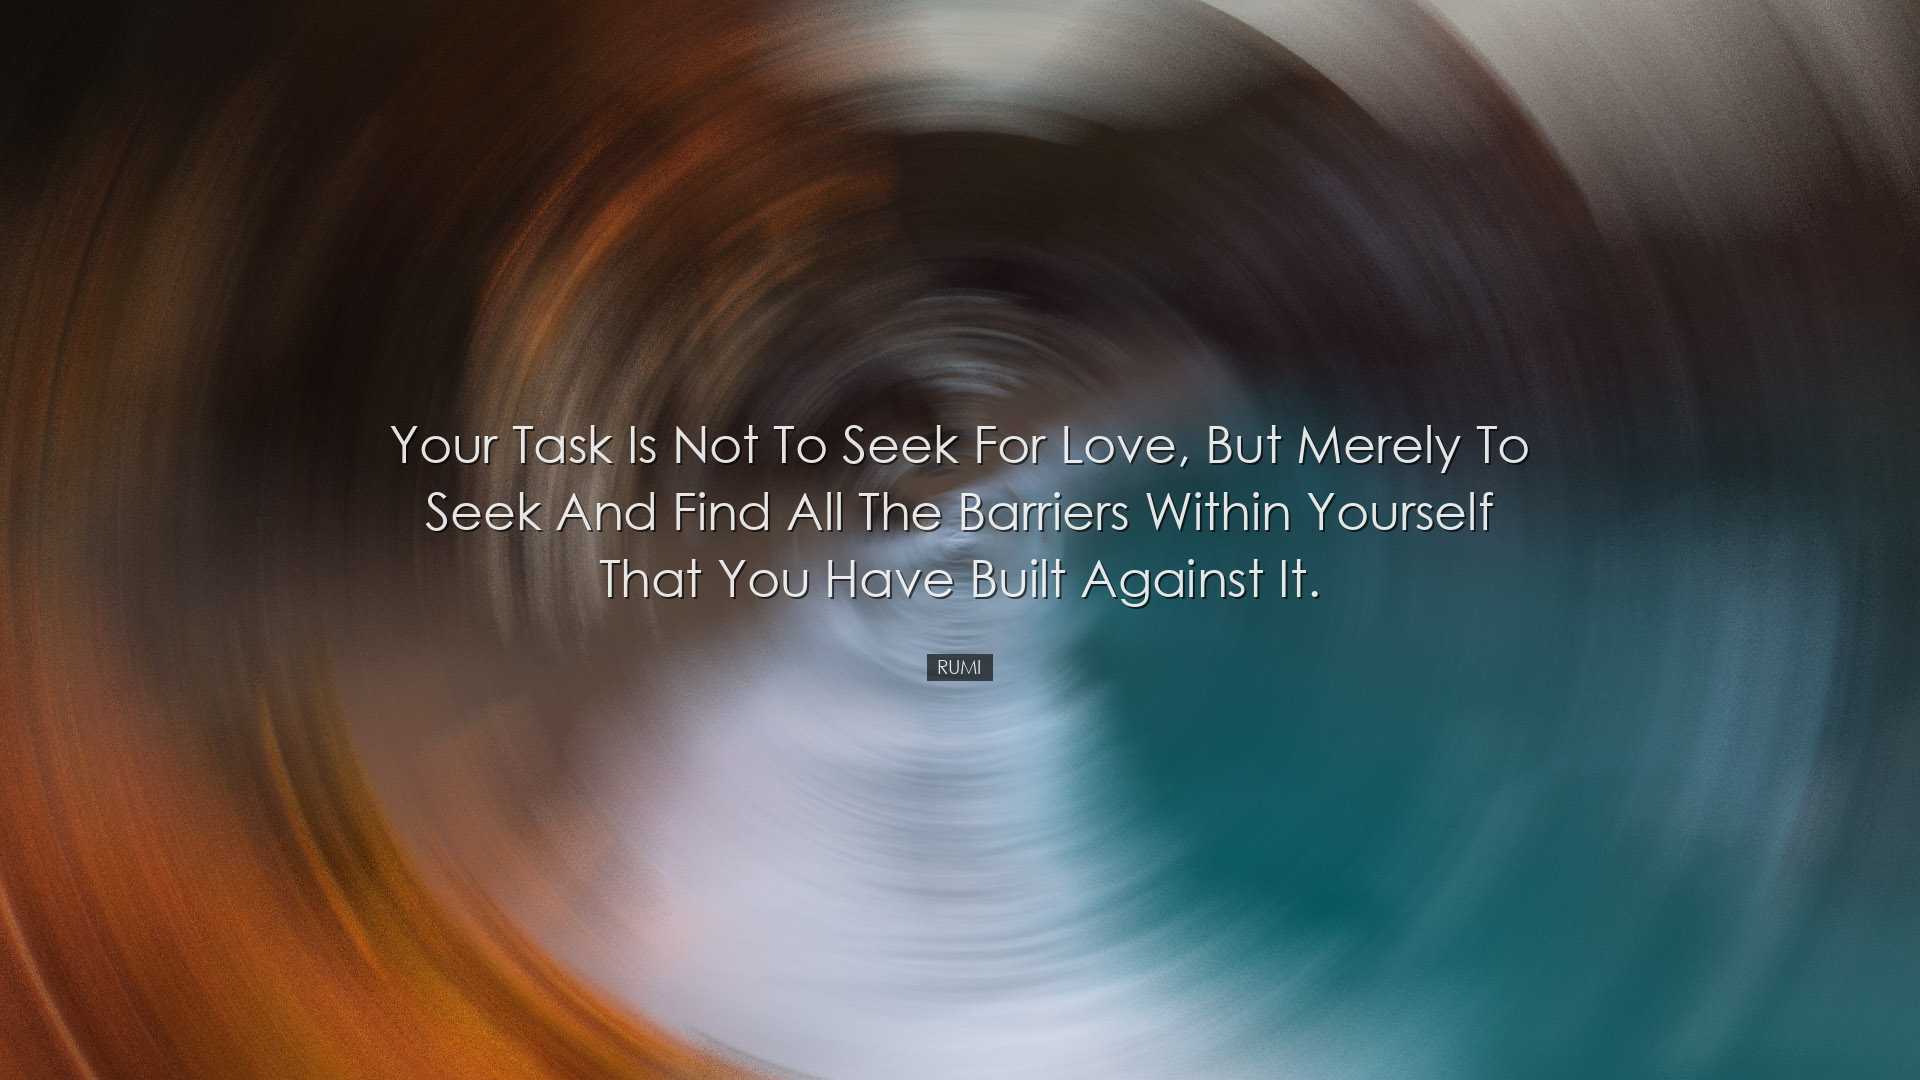 Your task is not to seek for love, but merely to seek and find all